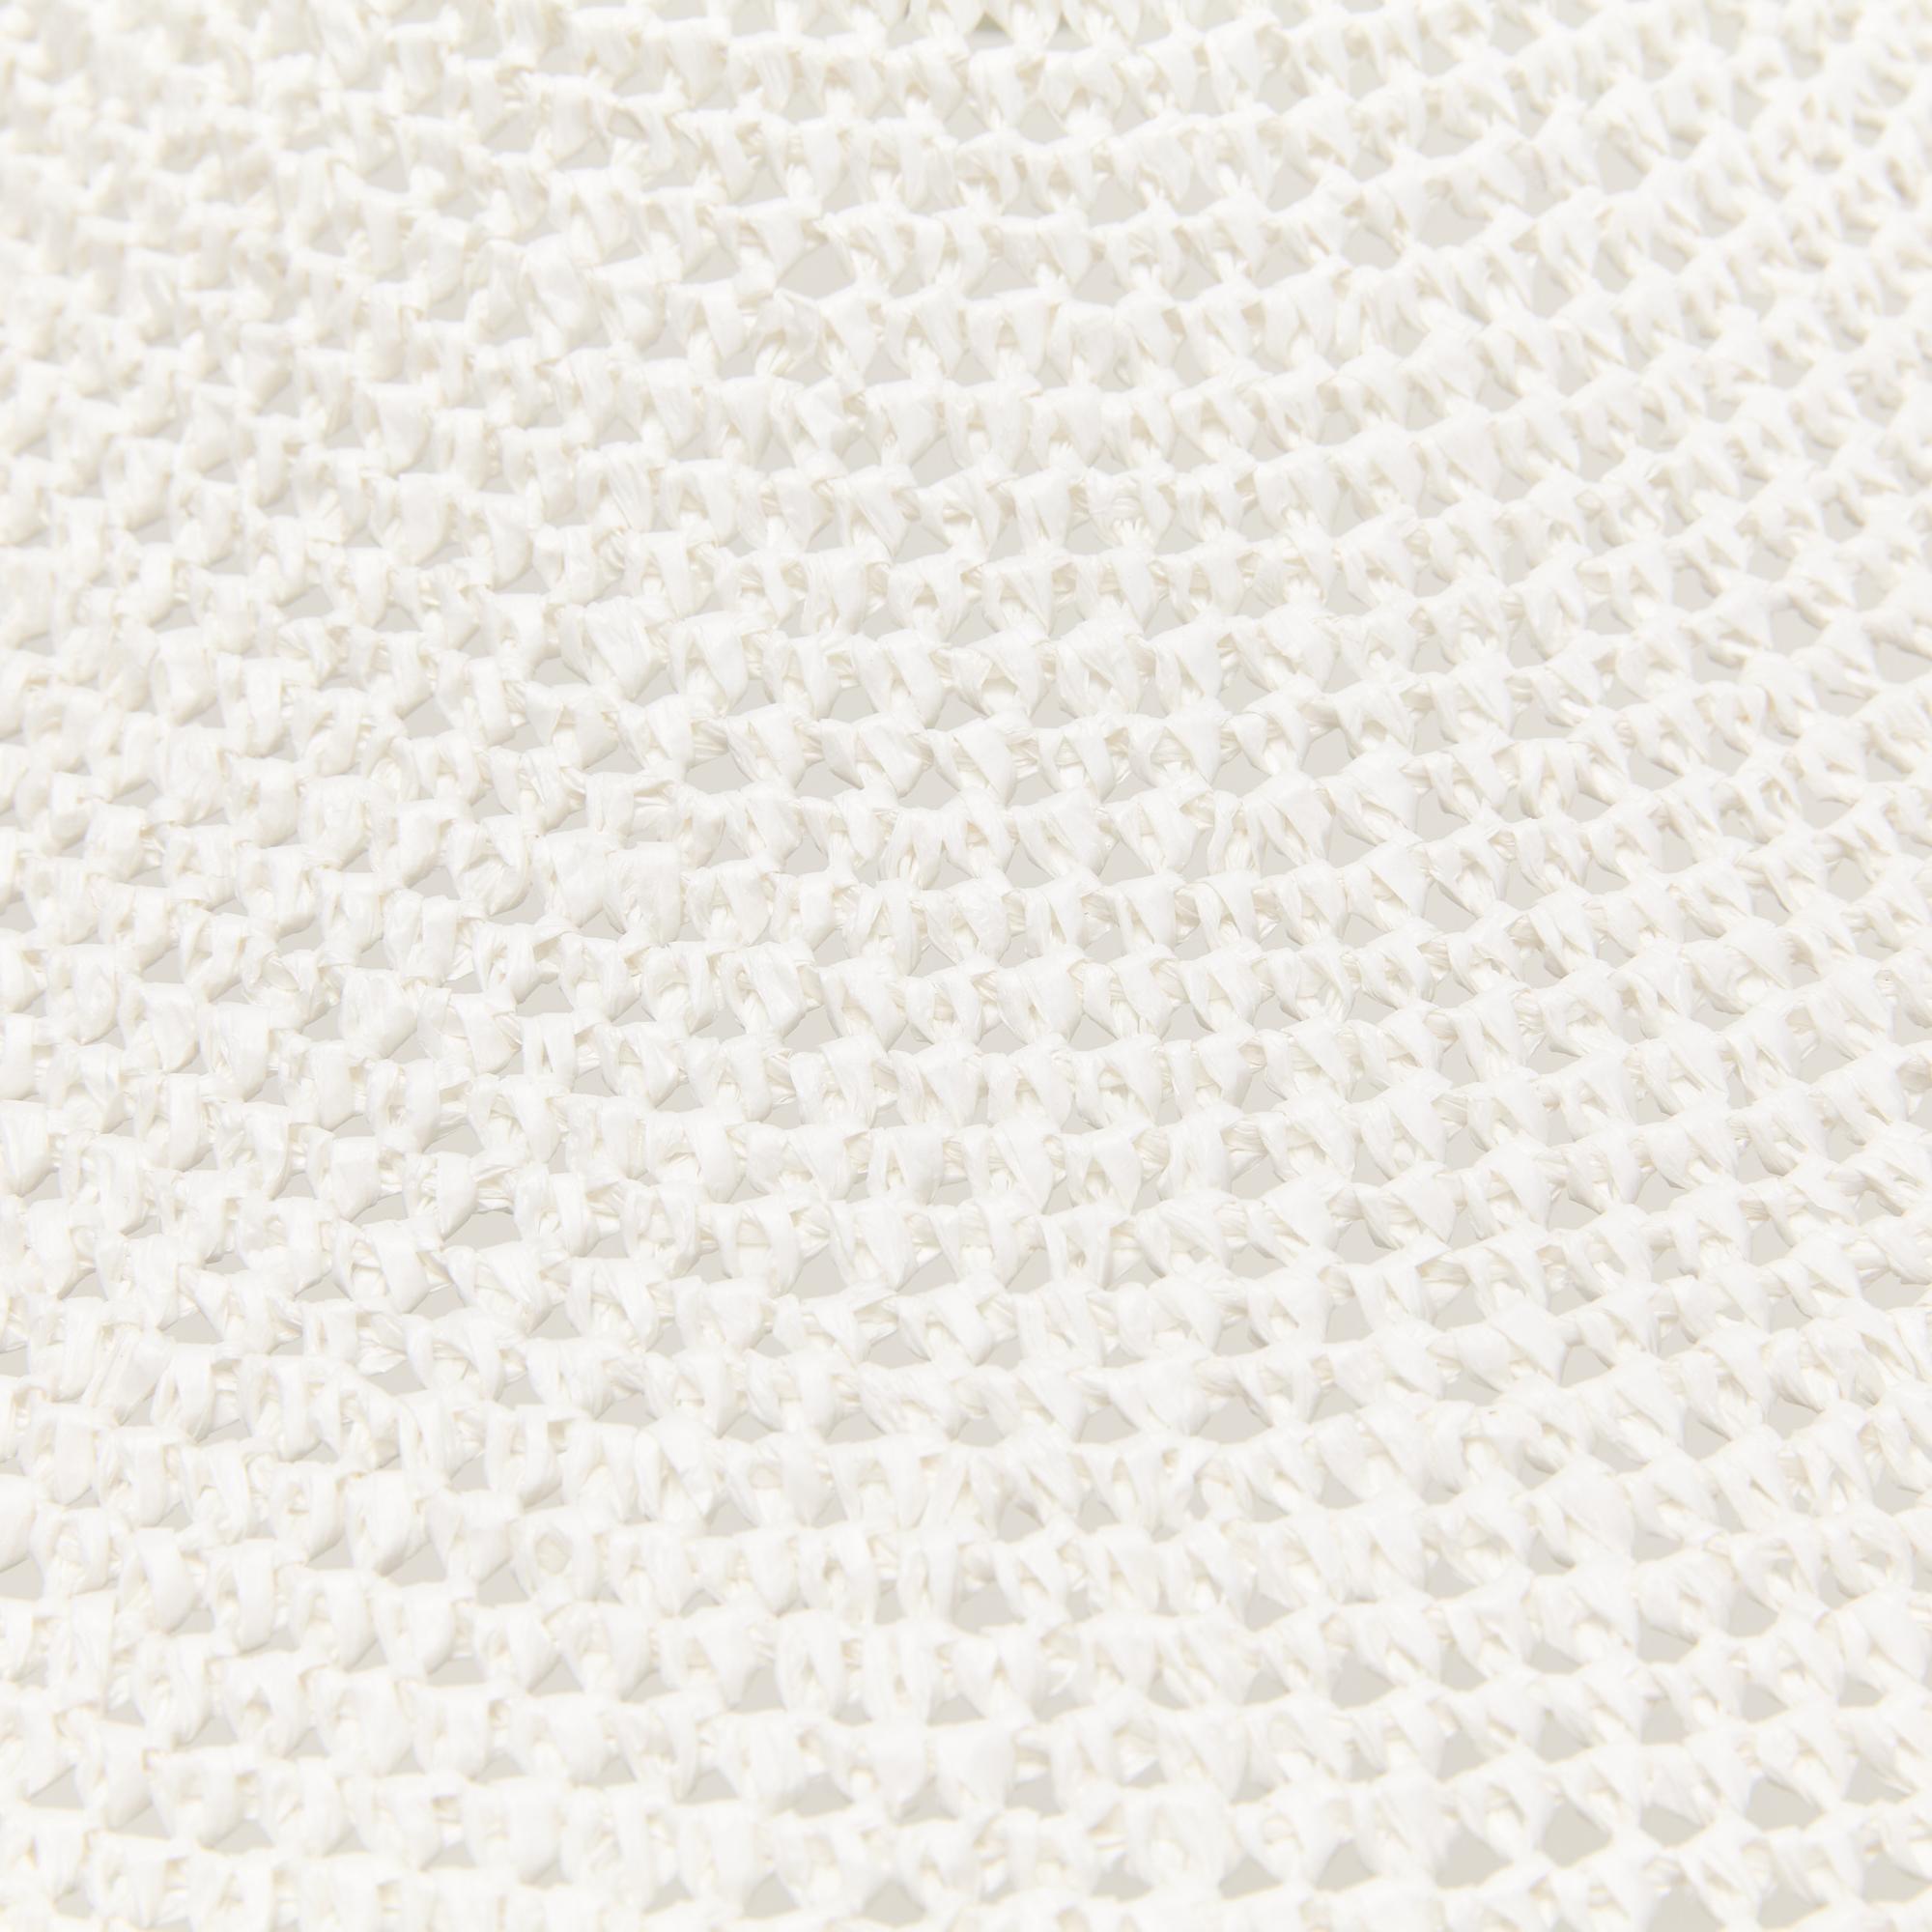 British SS02 Pendant Light Ø50cm/19.7 in, Hand Crocheted in 100% Egyptian Cotton For Sale